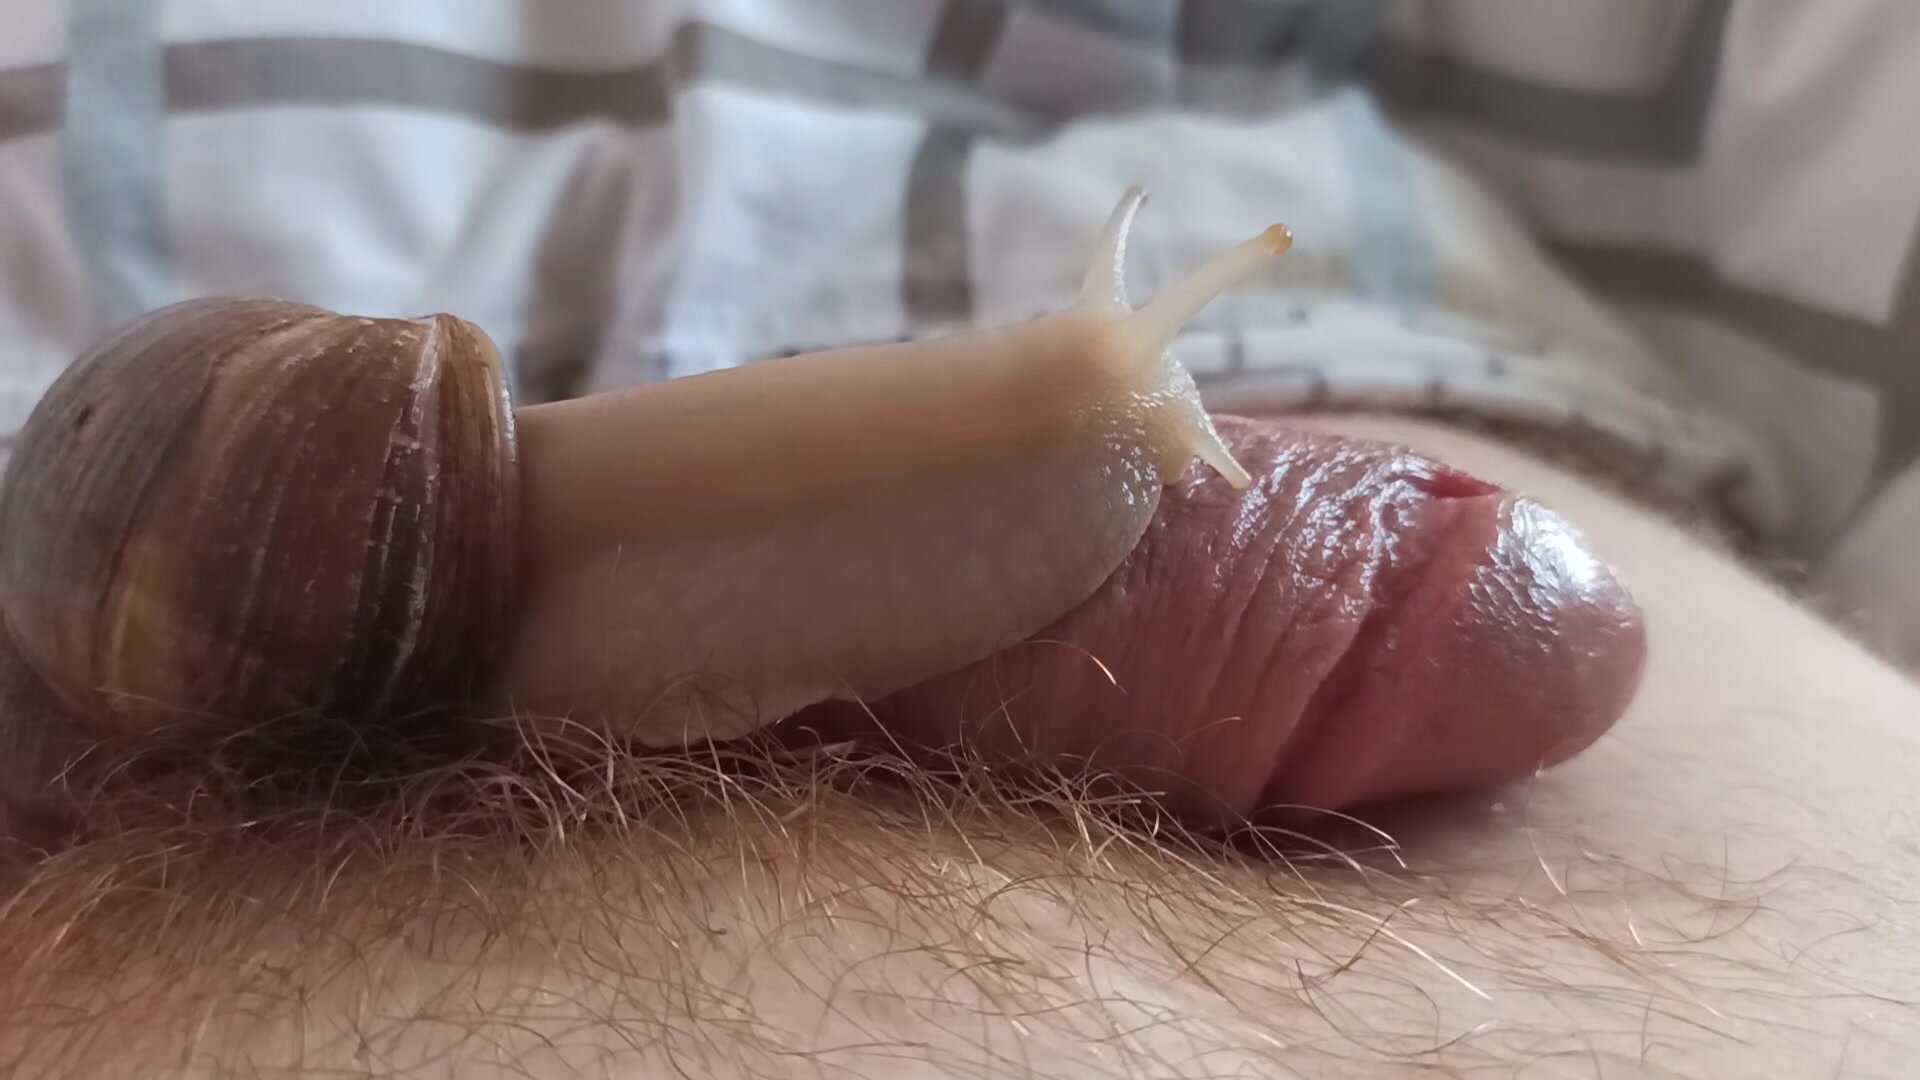 10 minutes of uninterrupted snail massage for my cock